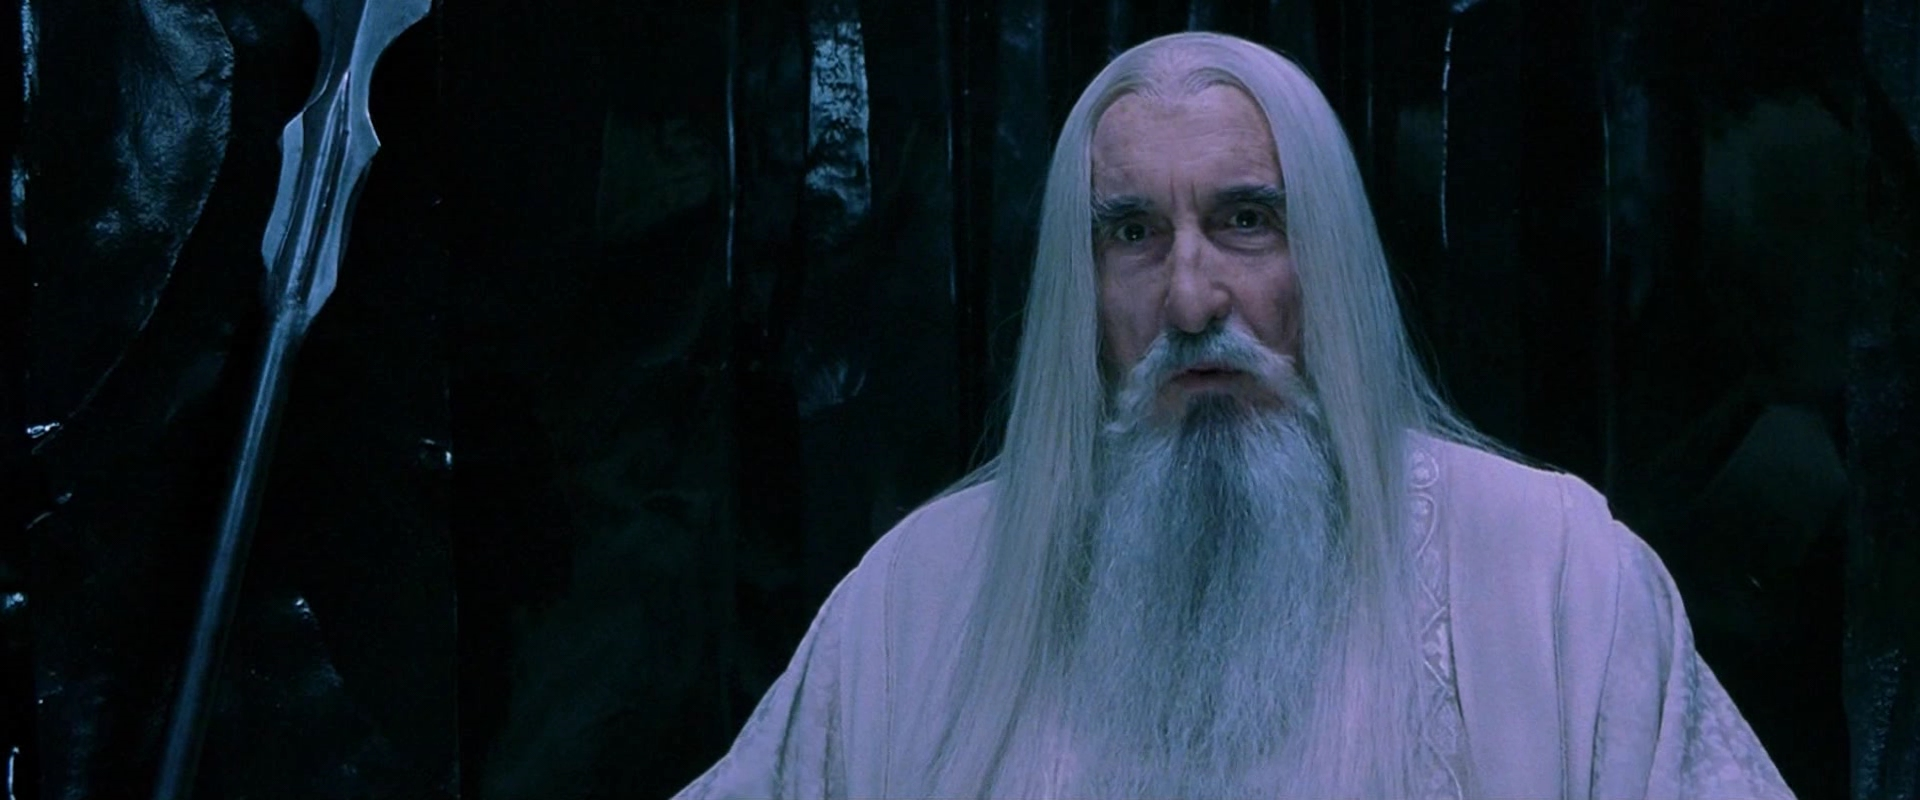 High Quality Saruman the hour is later than you think Blank Meme Template